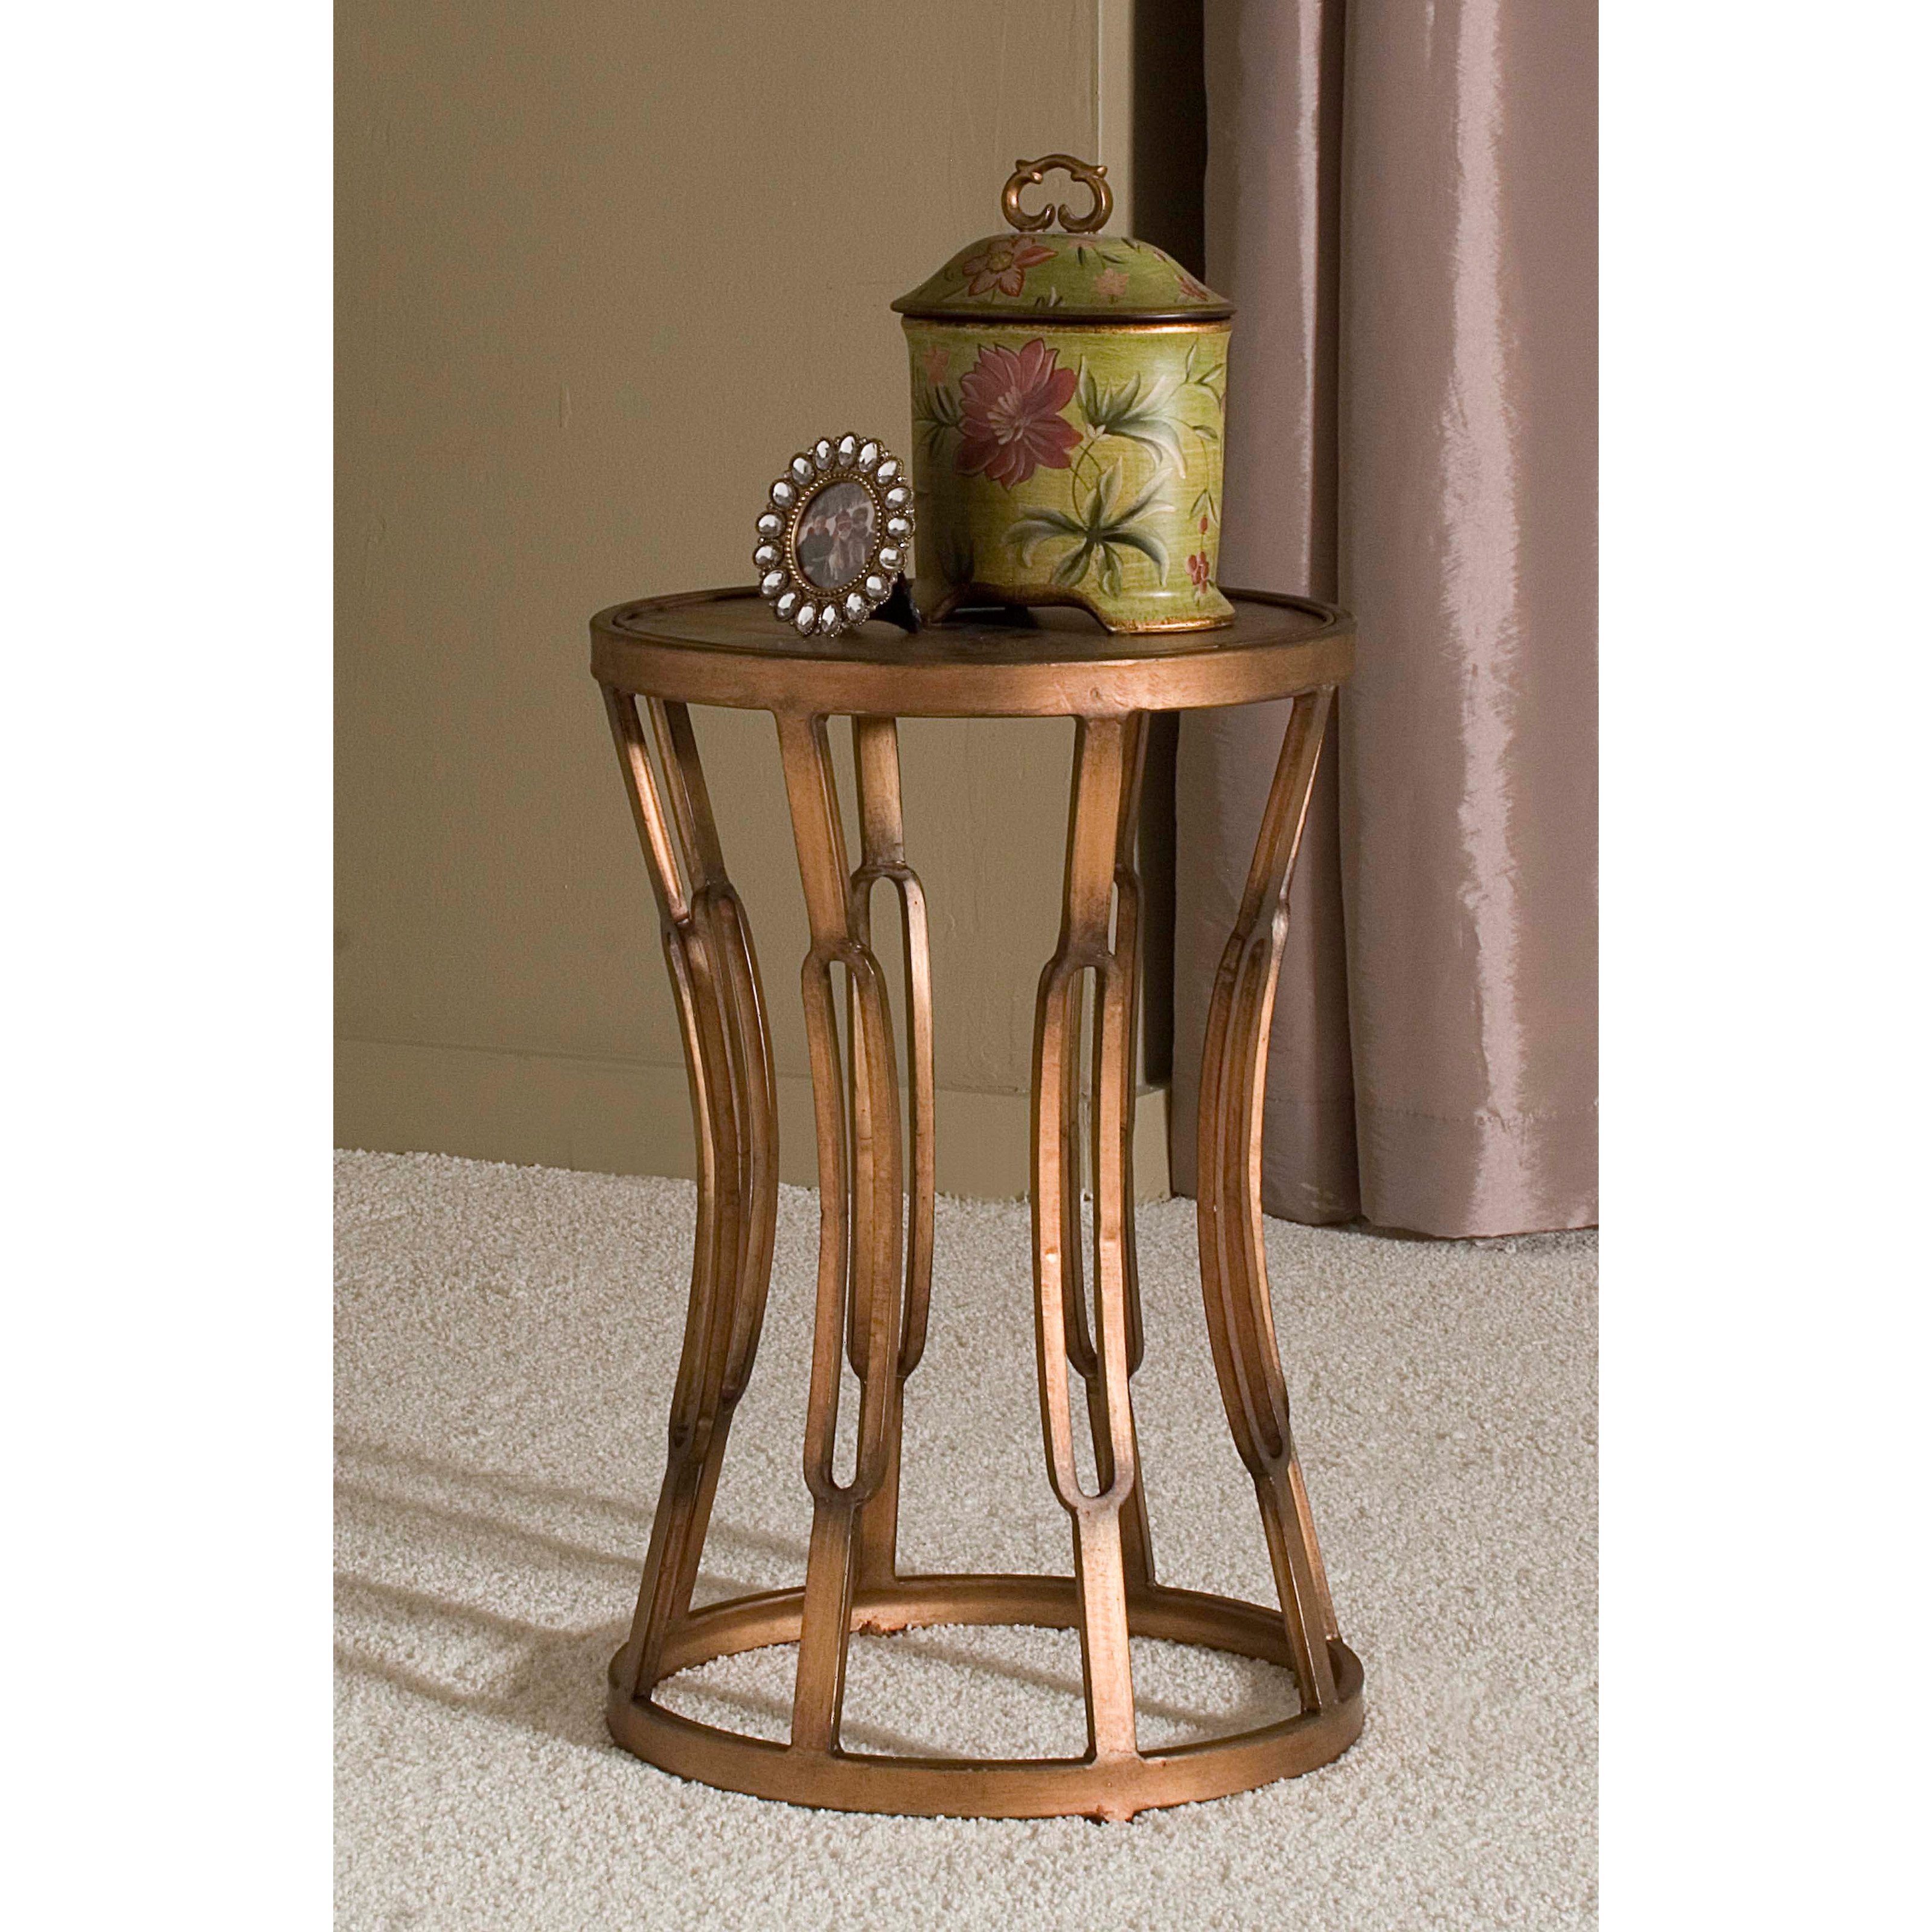 innerspace hourglass accent table antique copper end french round drum target furniture coffee large patio umbrella gold rimmed tables unique small side for nursery farmhouse